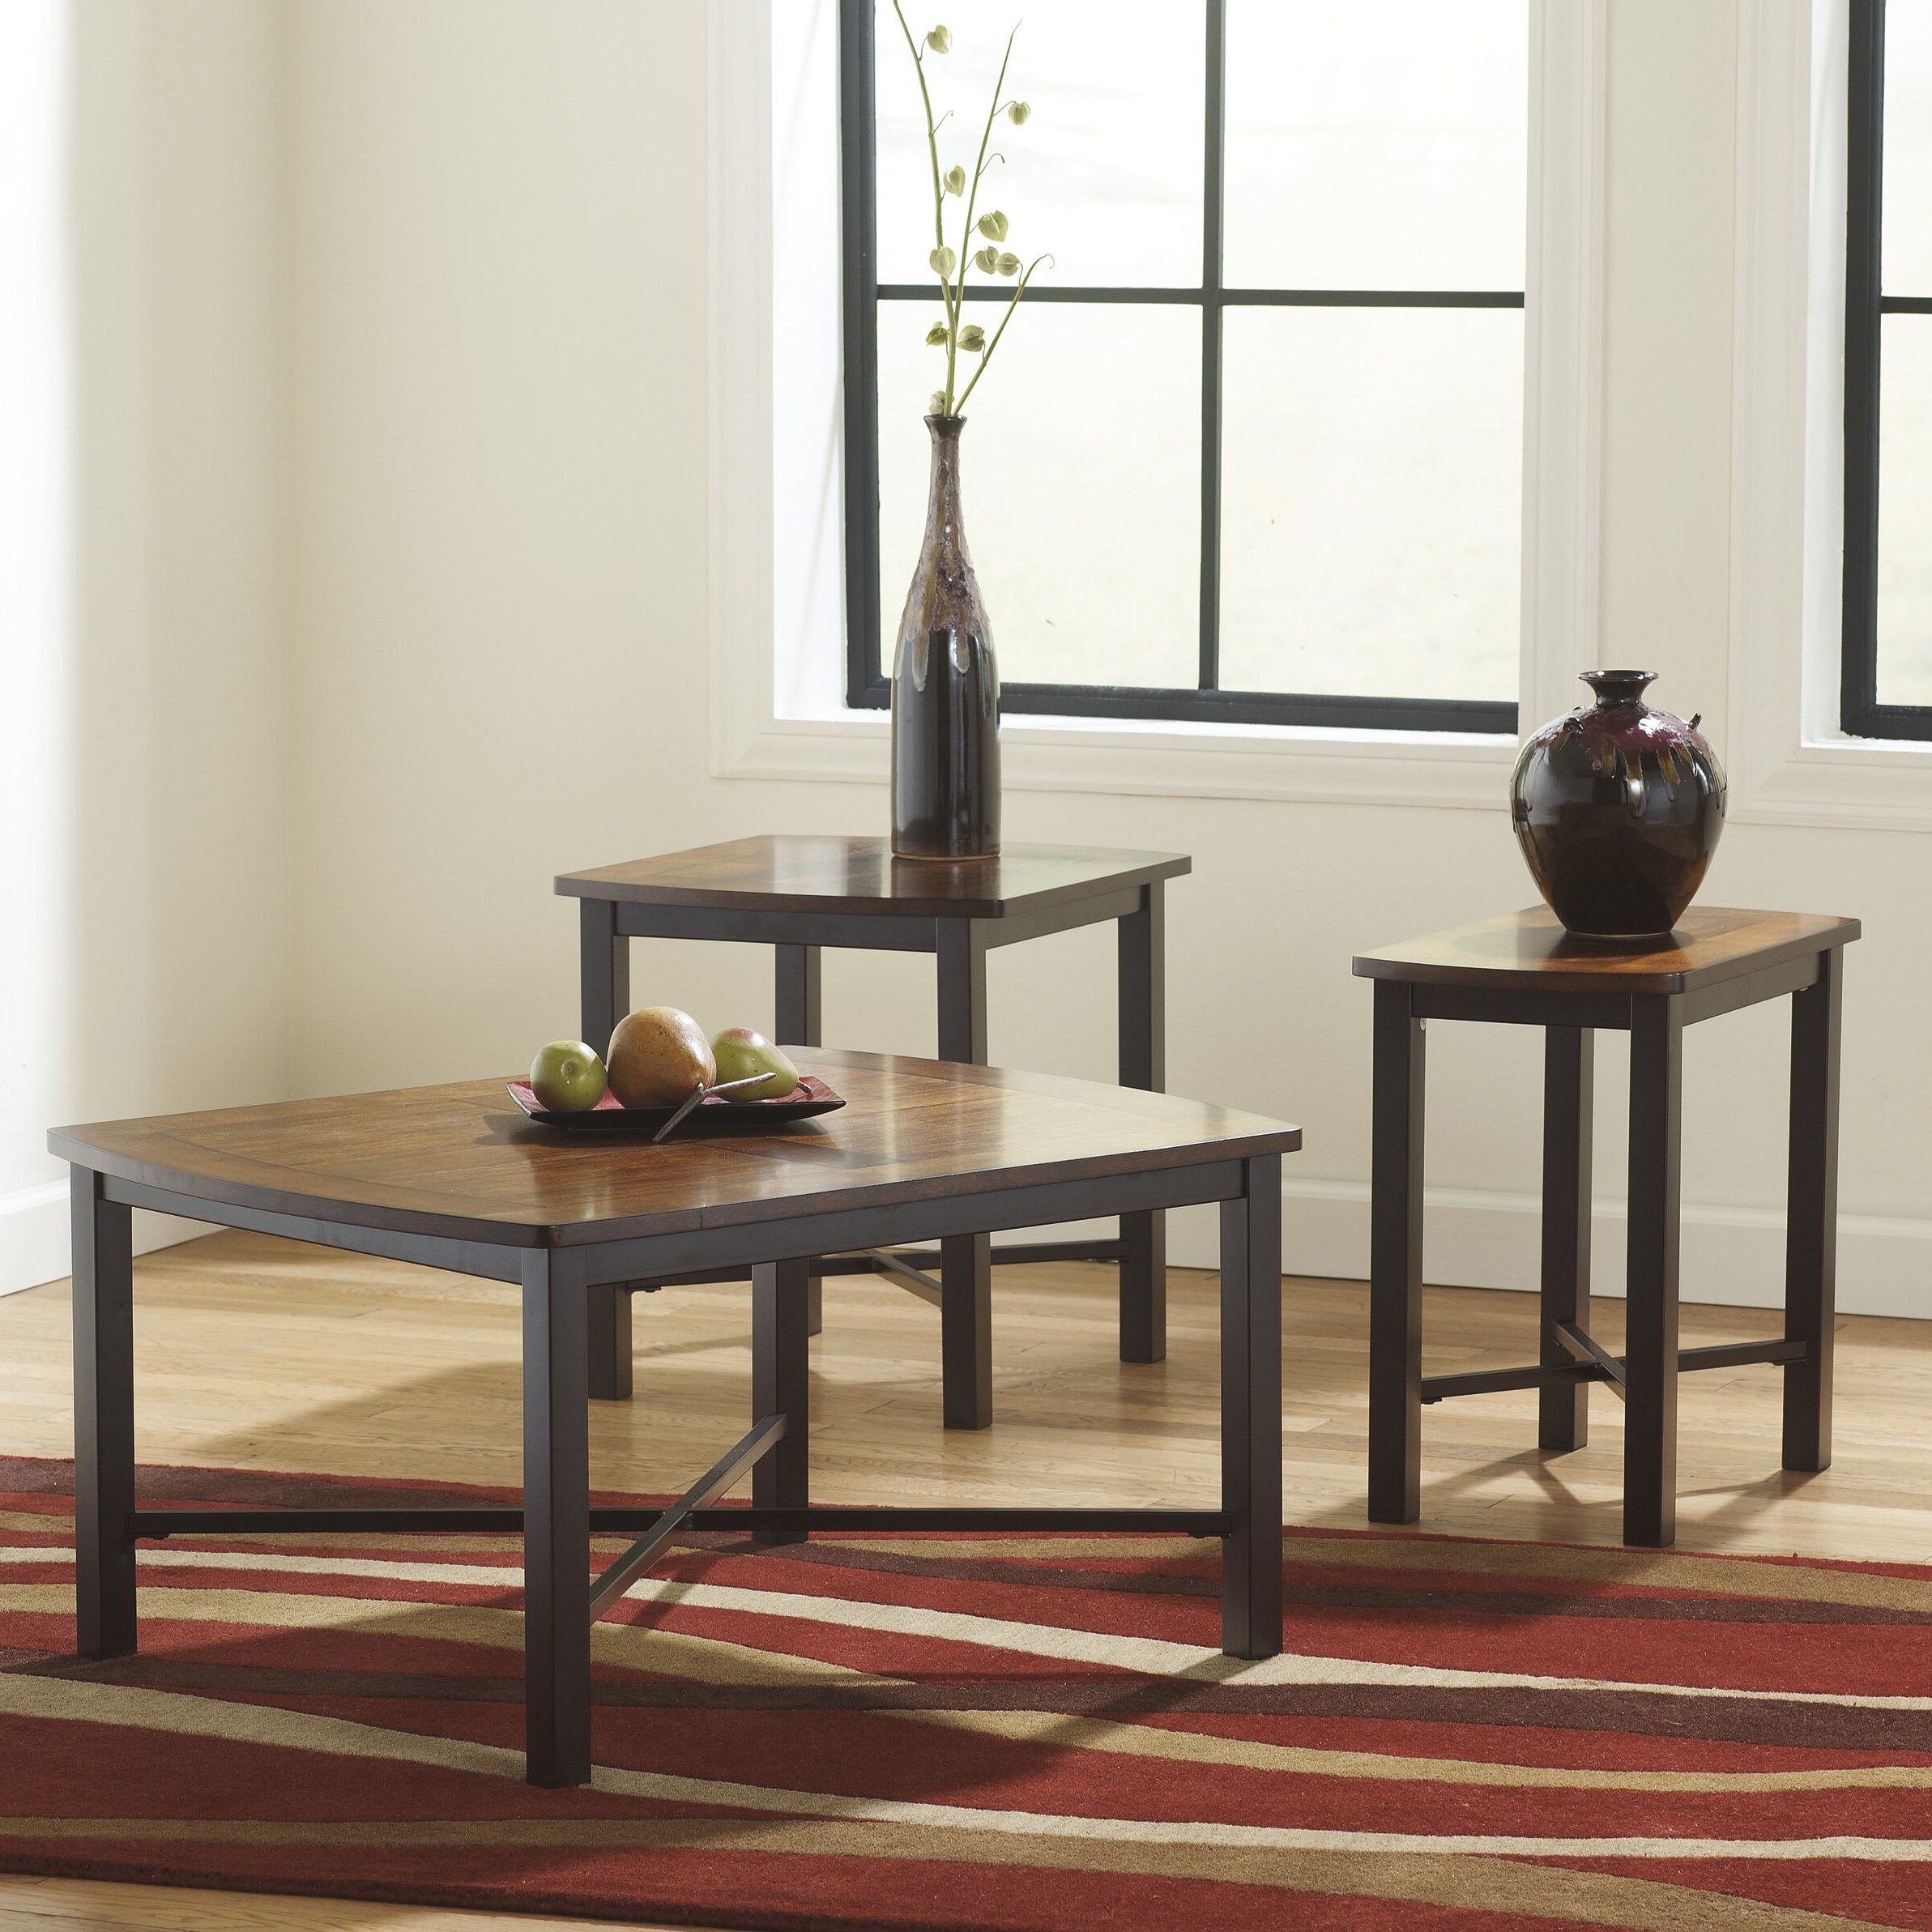 Wayfair Throughout 2019 3 Piece Coffee Tables (View 10 of 10)